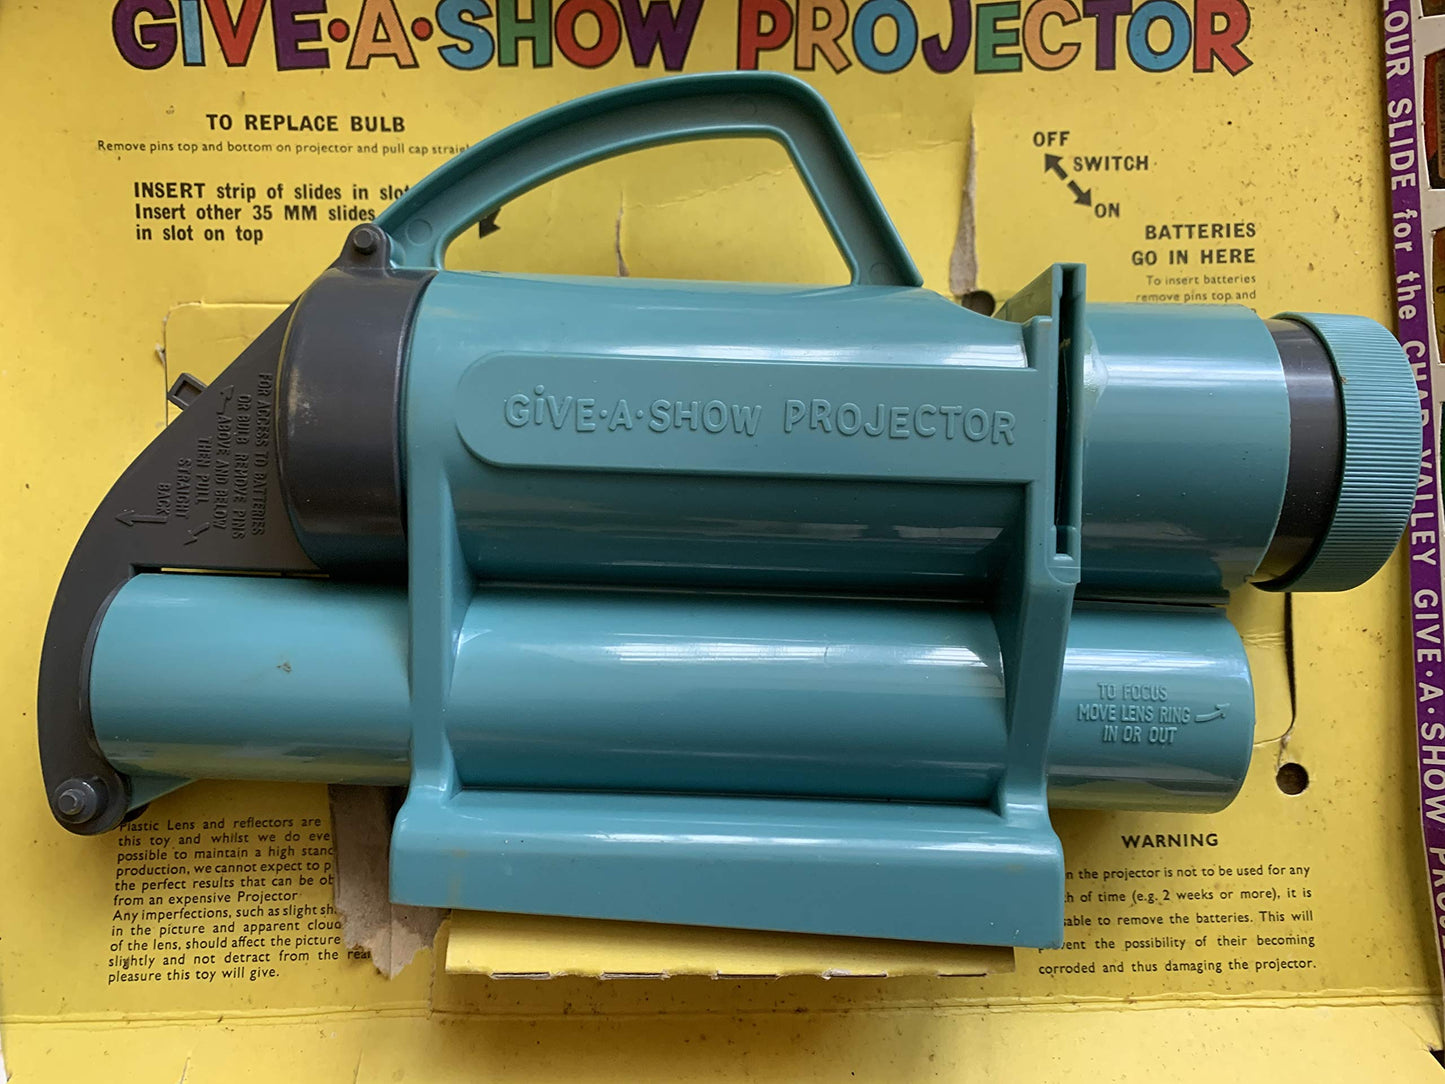 DOCTOR WHO Vintage 1965 Chad Valley Dr Give A Show Projector Set Fully Working And Complete In The Original Box. Includes 112 Colour Slides Showing 16 Complete Stories Ultra Rare